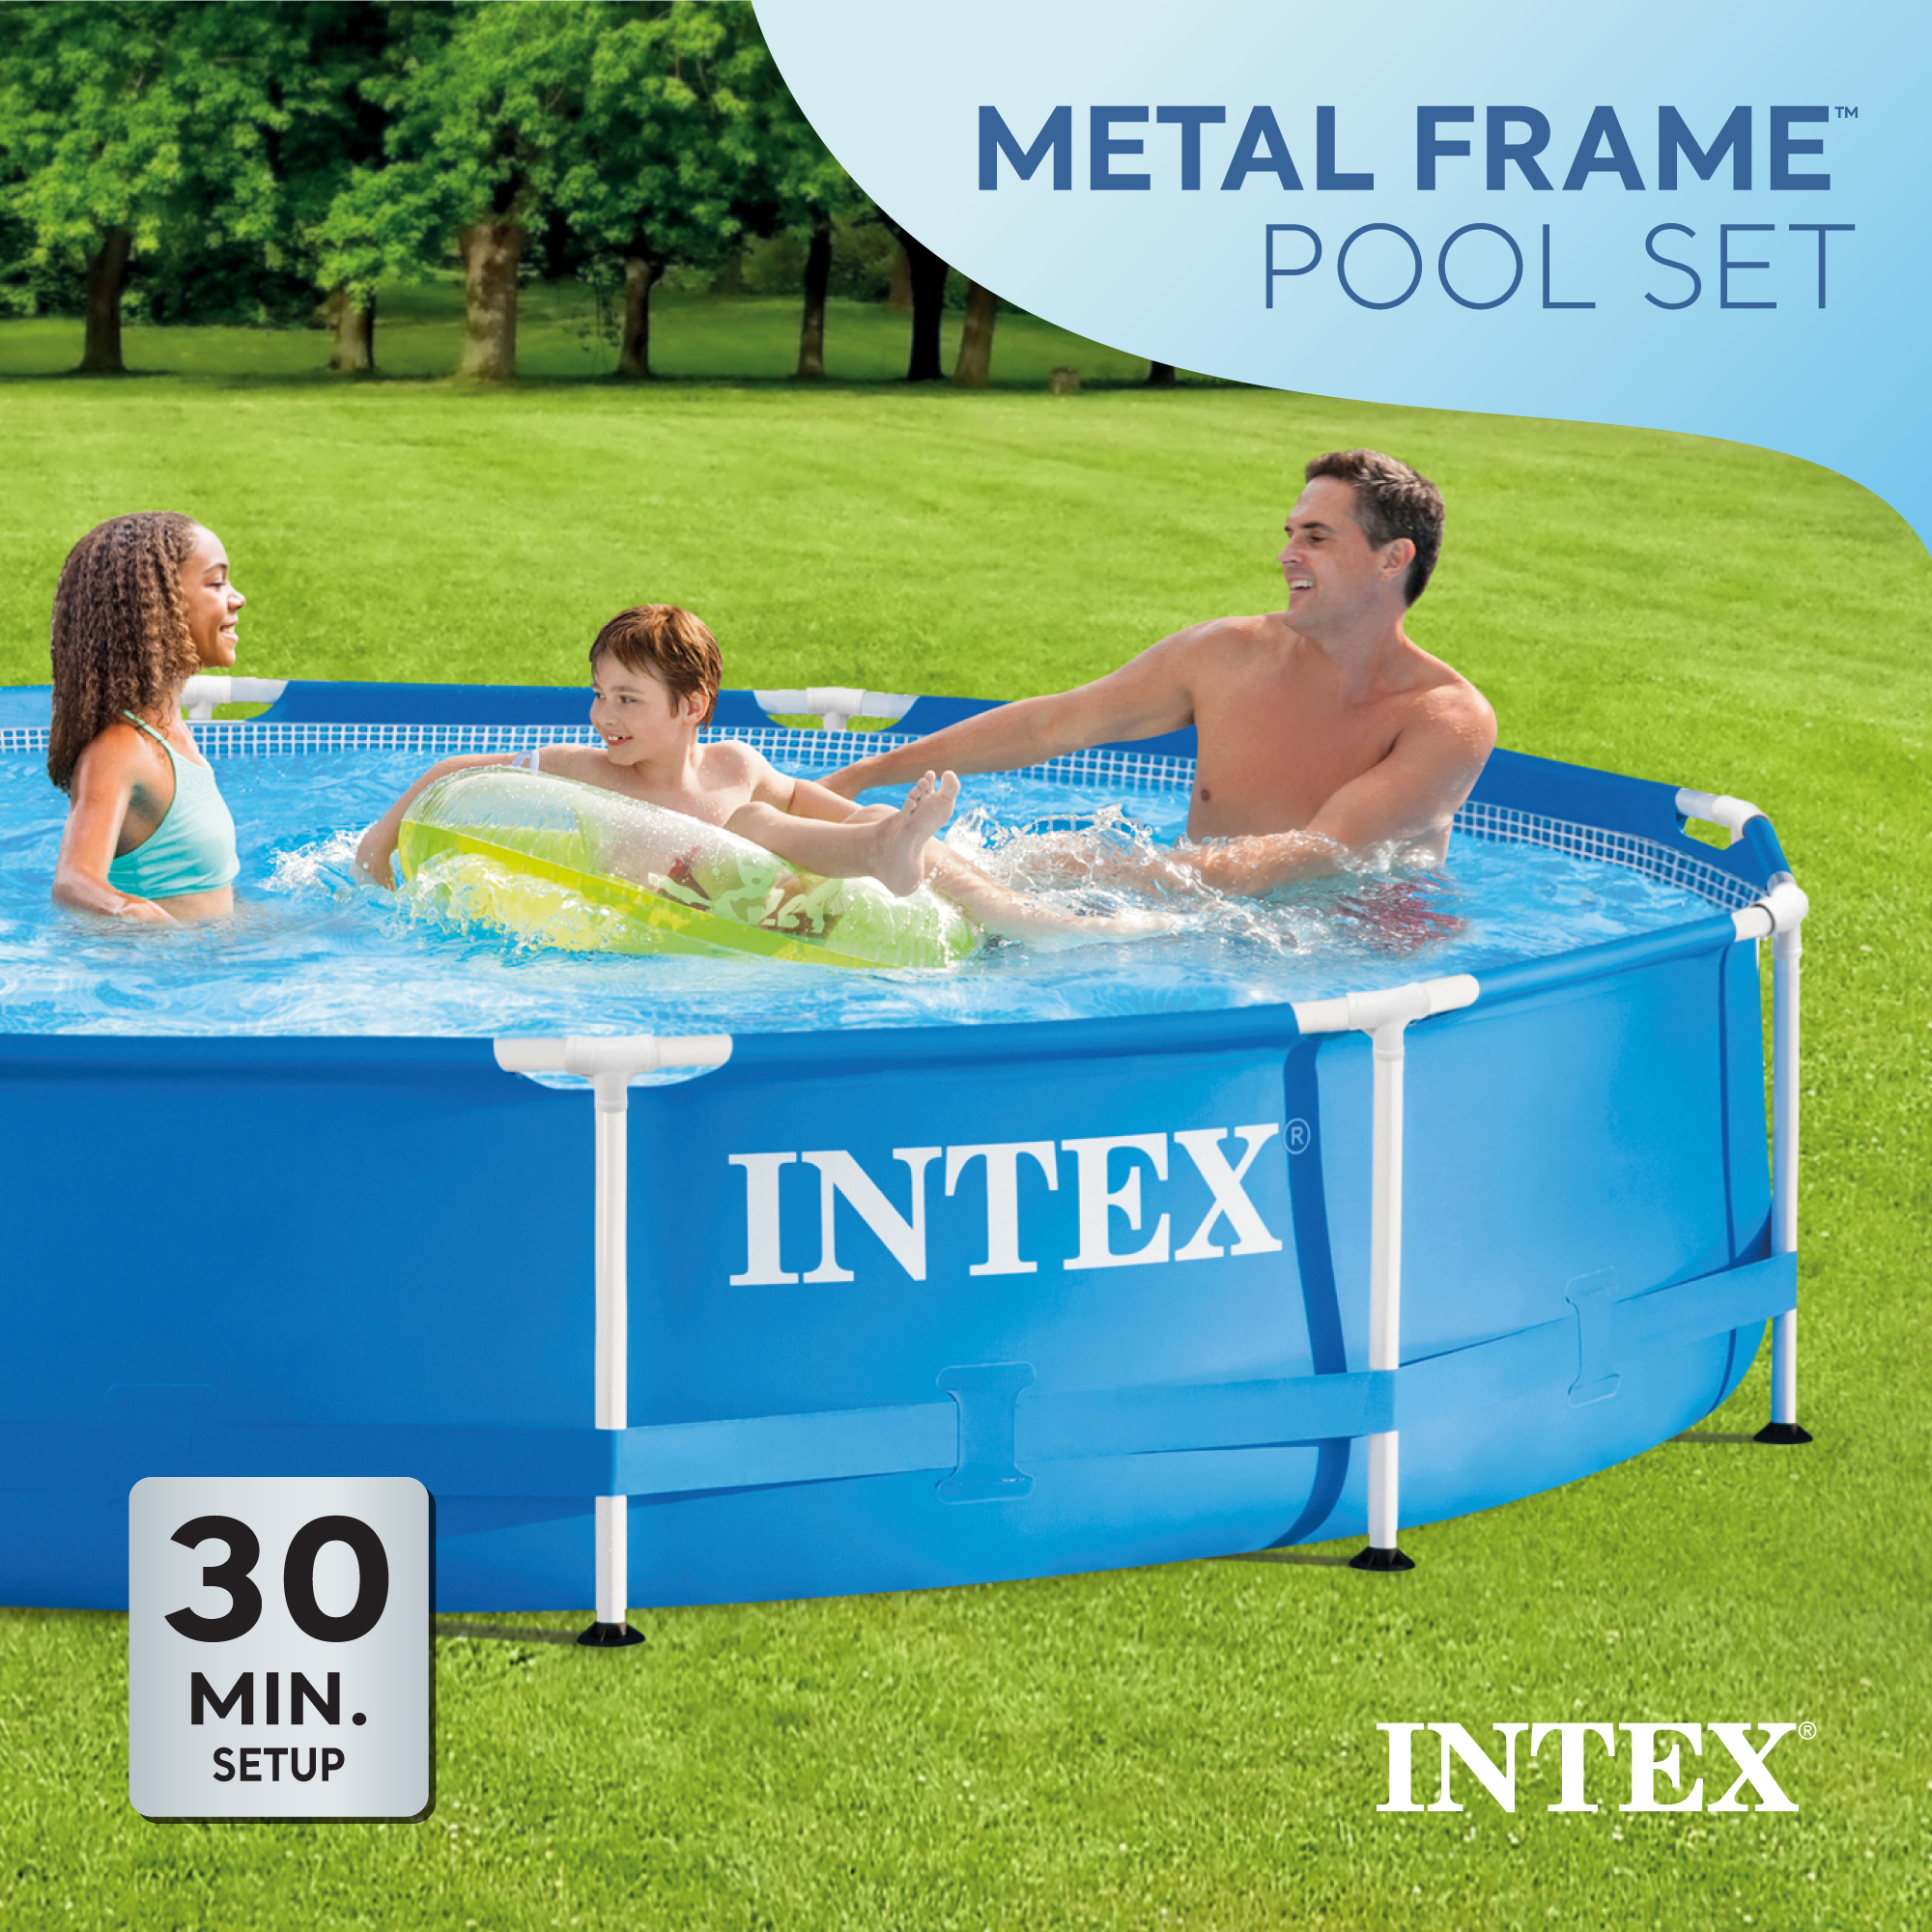 Intex 12' x 30'' Metal Frame Above Ground Swimming Pool with Filter Pump - image 4 of 13